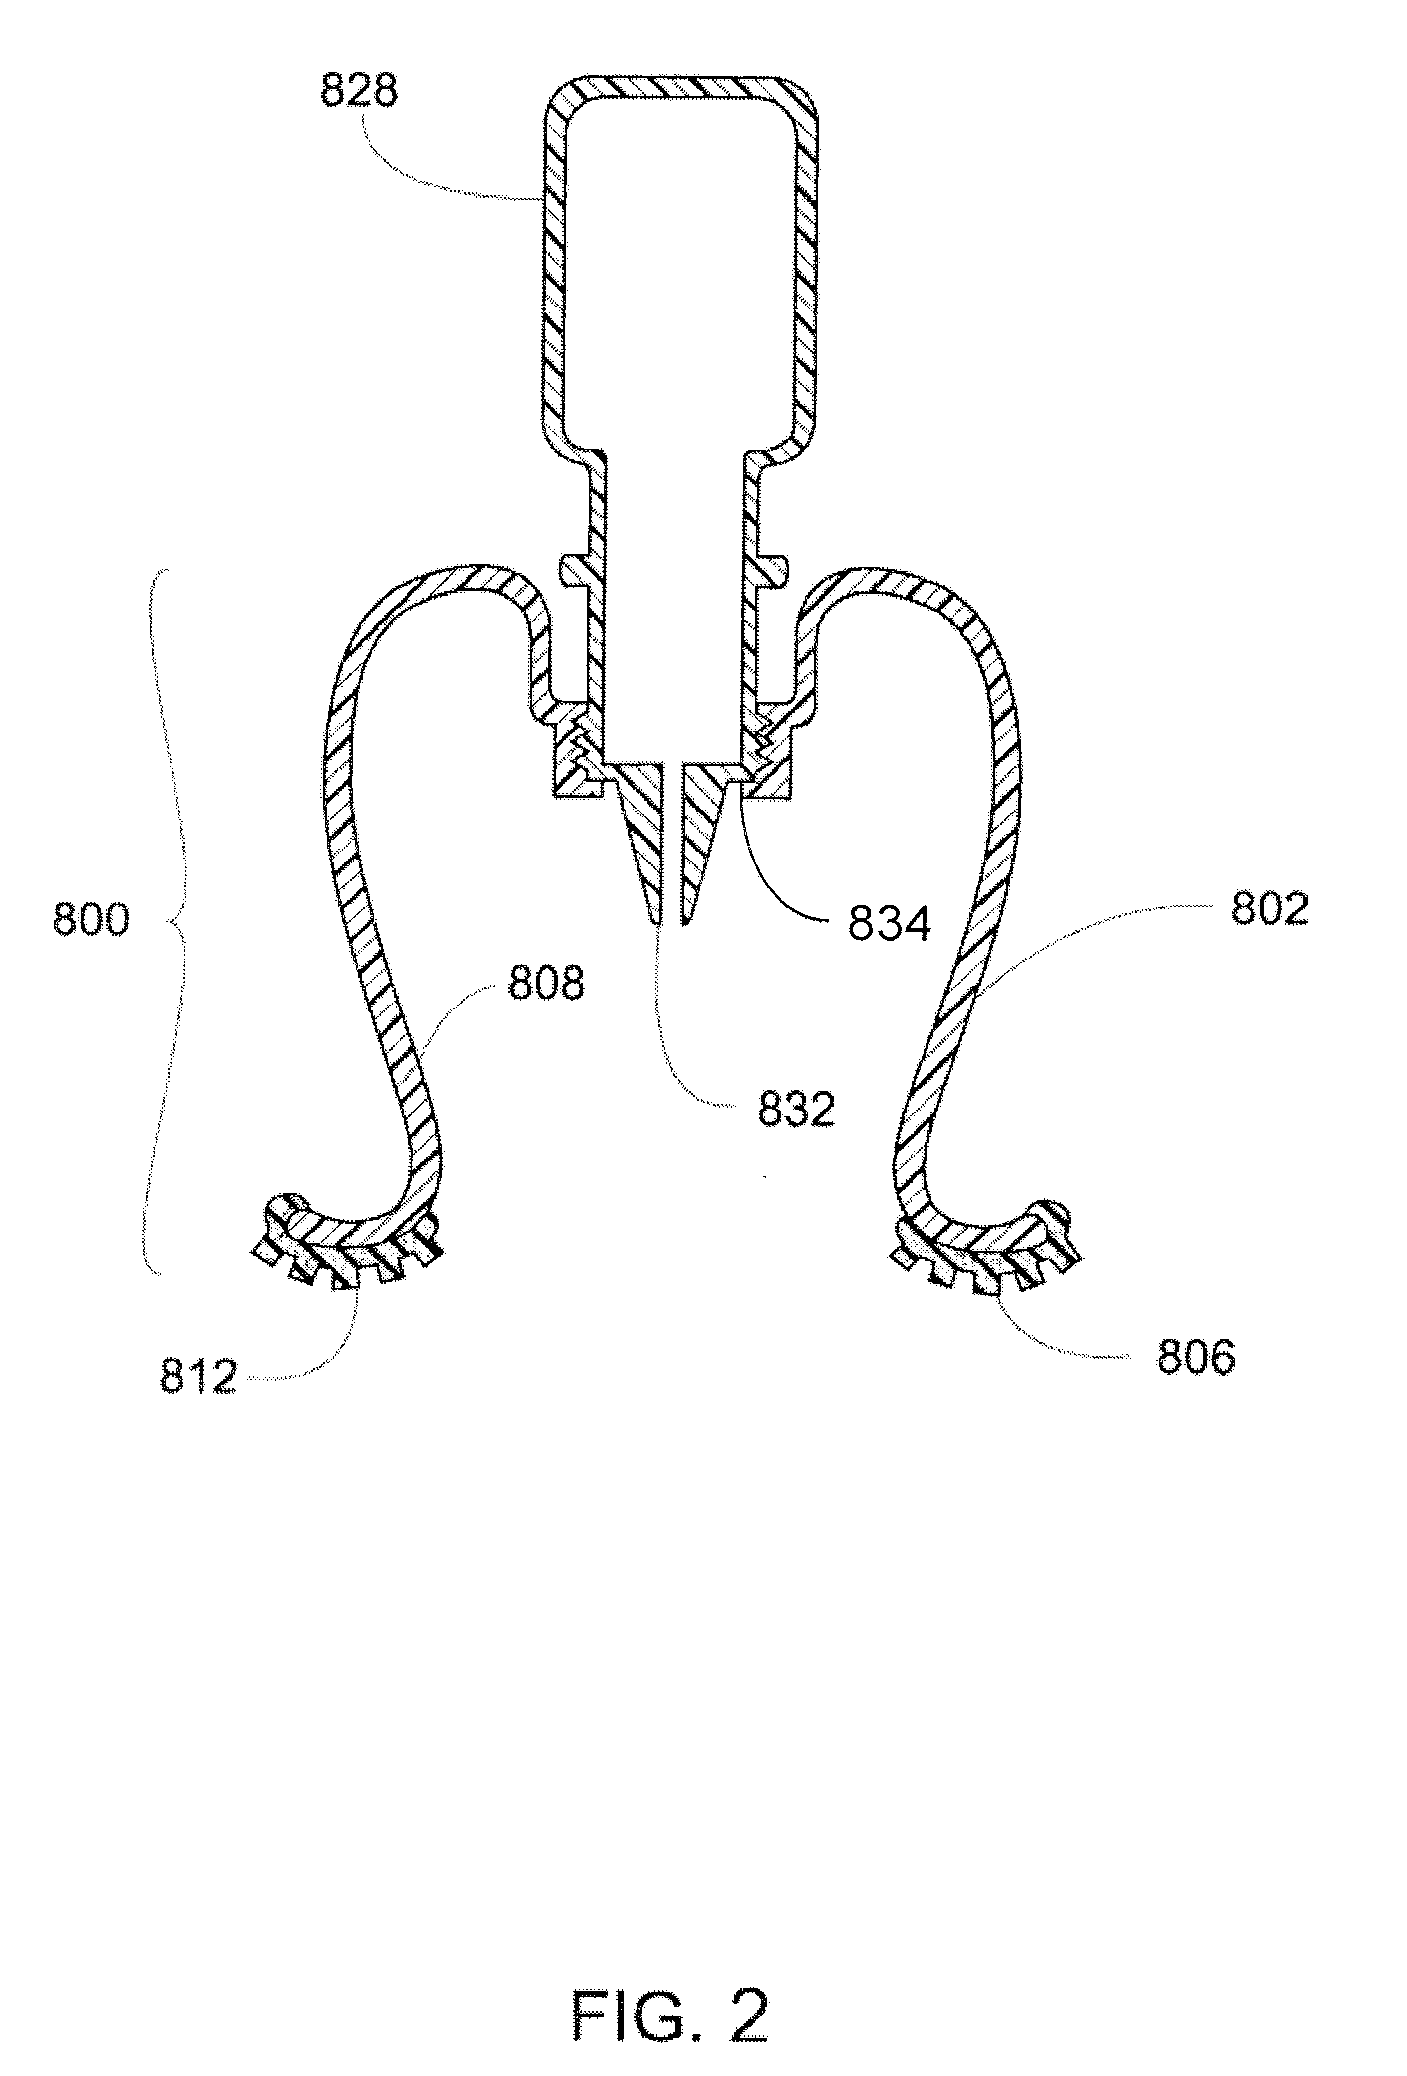 Automated Eyedrop Delivery System with Eyelid Retracting Legs